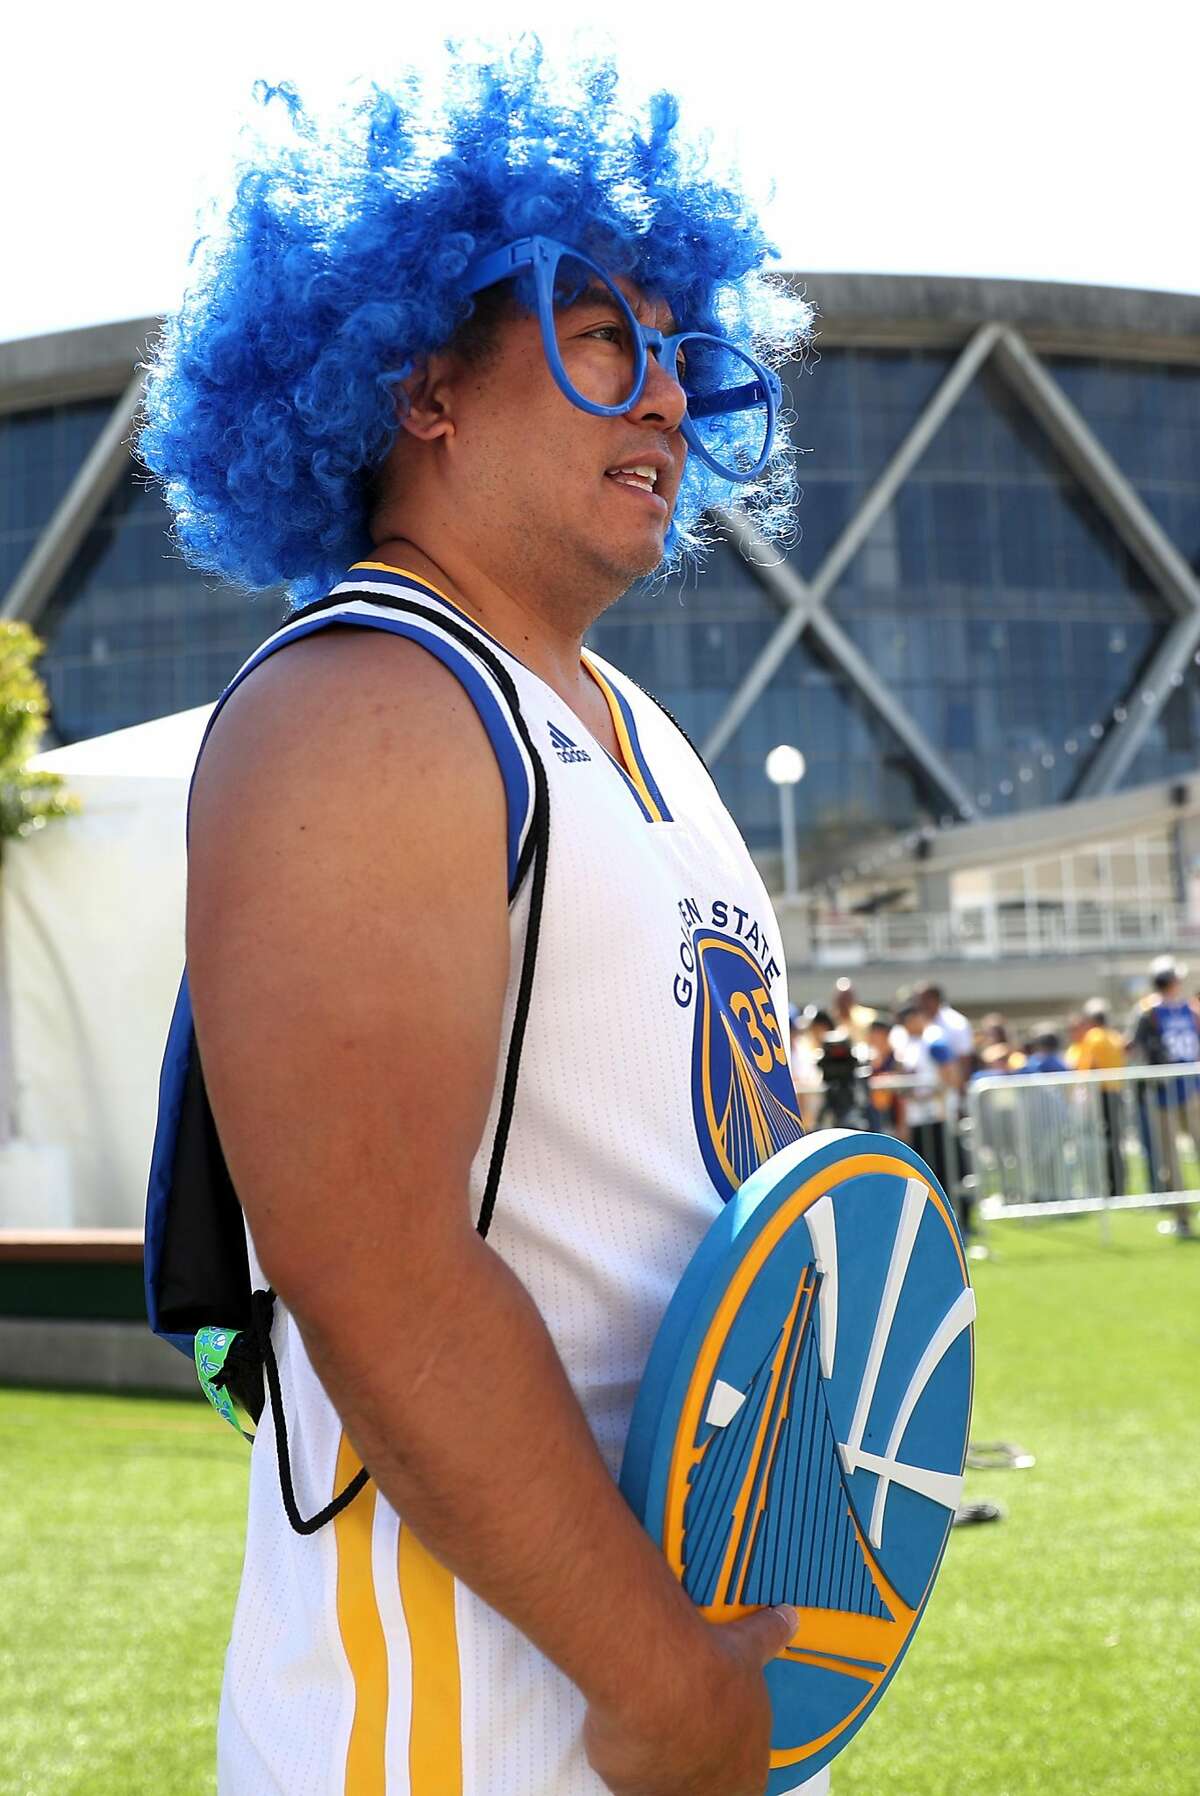 Golden State Warriors' fan Phil Eugenio of Union City waits in line to get a souvenir lanyard before Game 1 of the NBA Finals at Oracle Arena in Oakland, Calif., on Thursday, June 1, 2017.